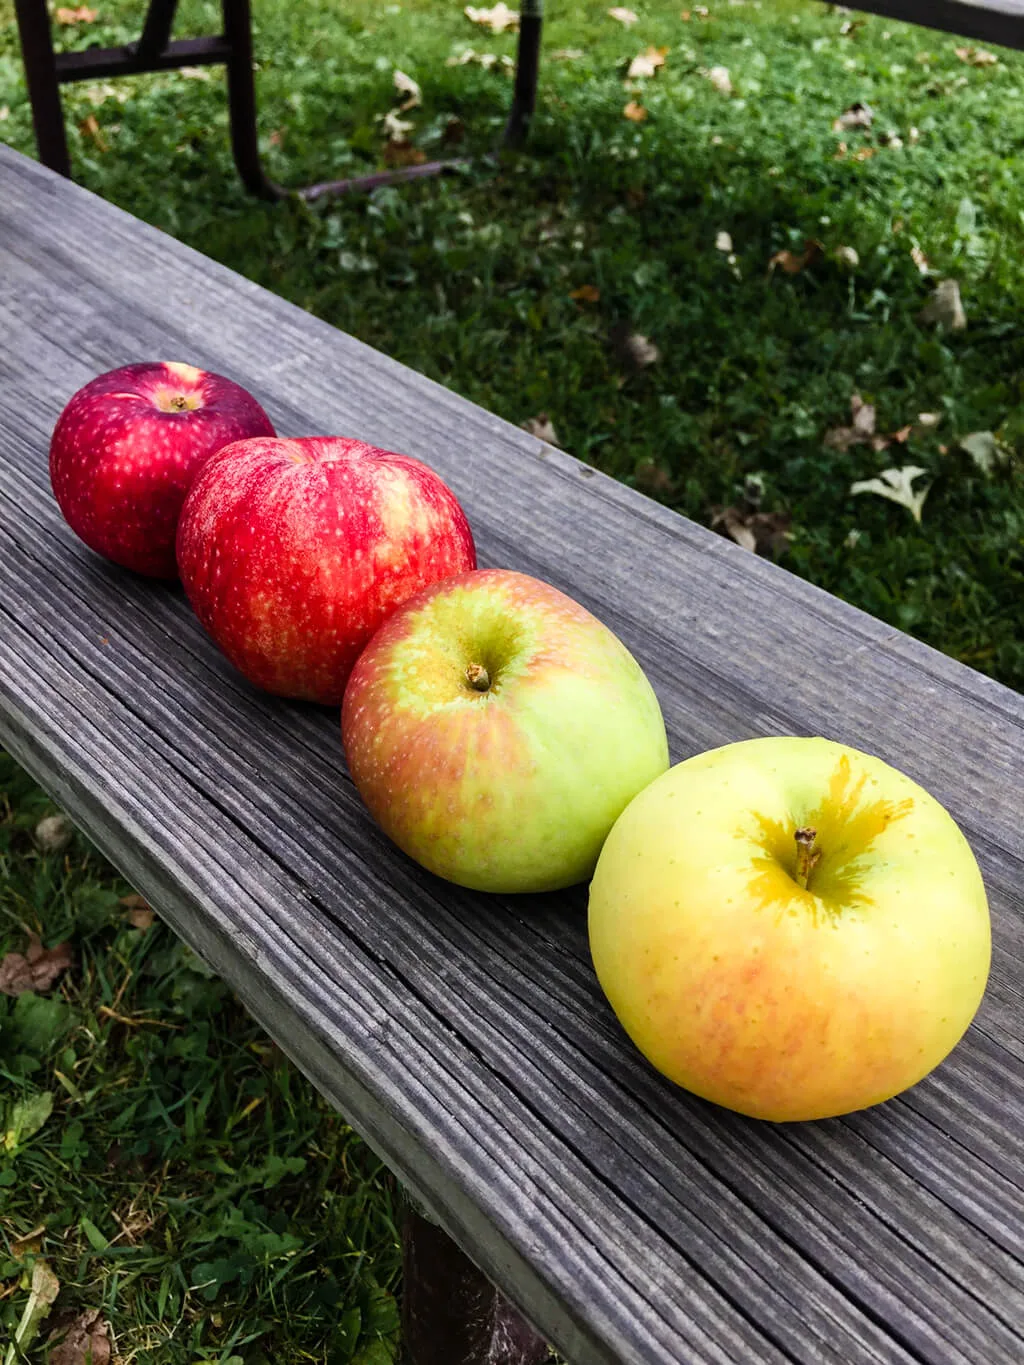 Red, pink, green and yellow apples at Brightonwoods Apple Orchard, Wisconsin